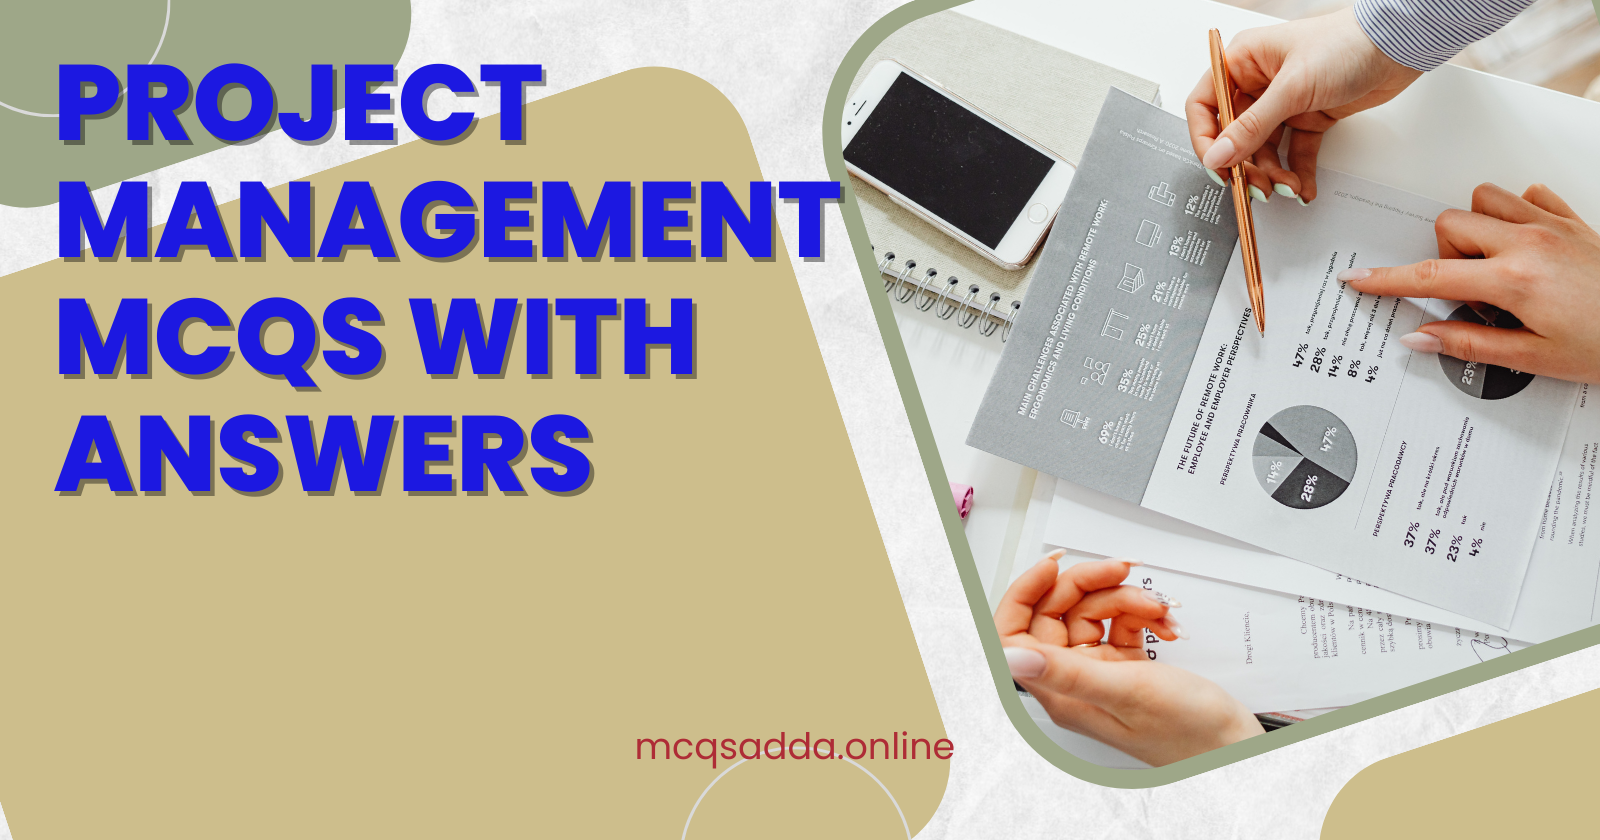 Project management MCQs with answers